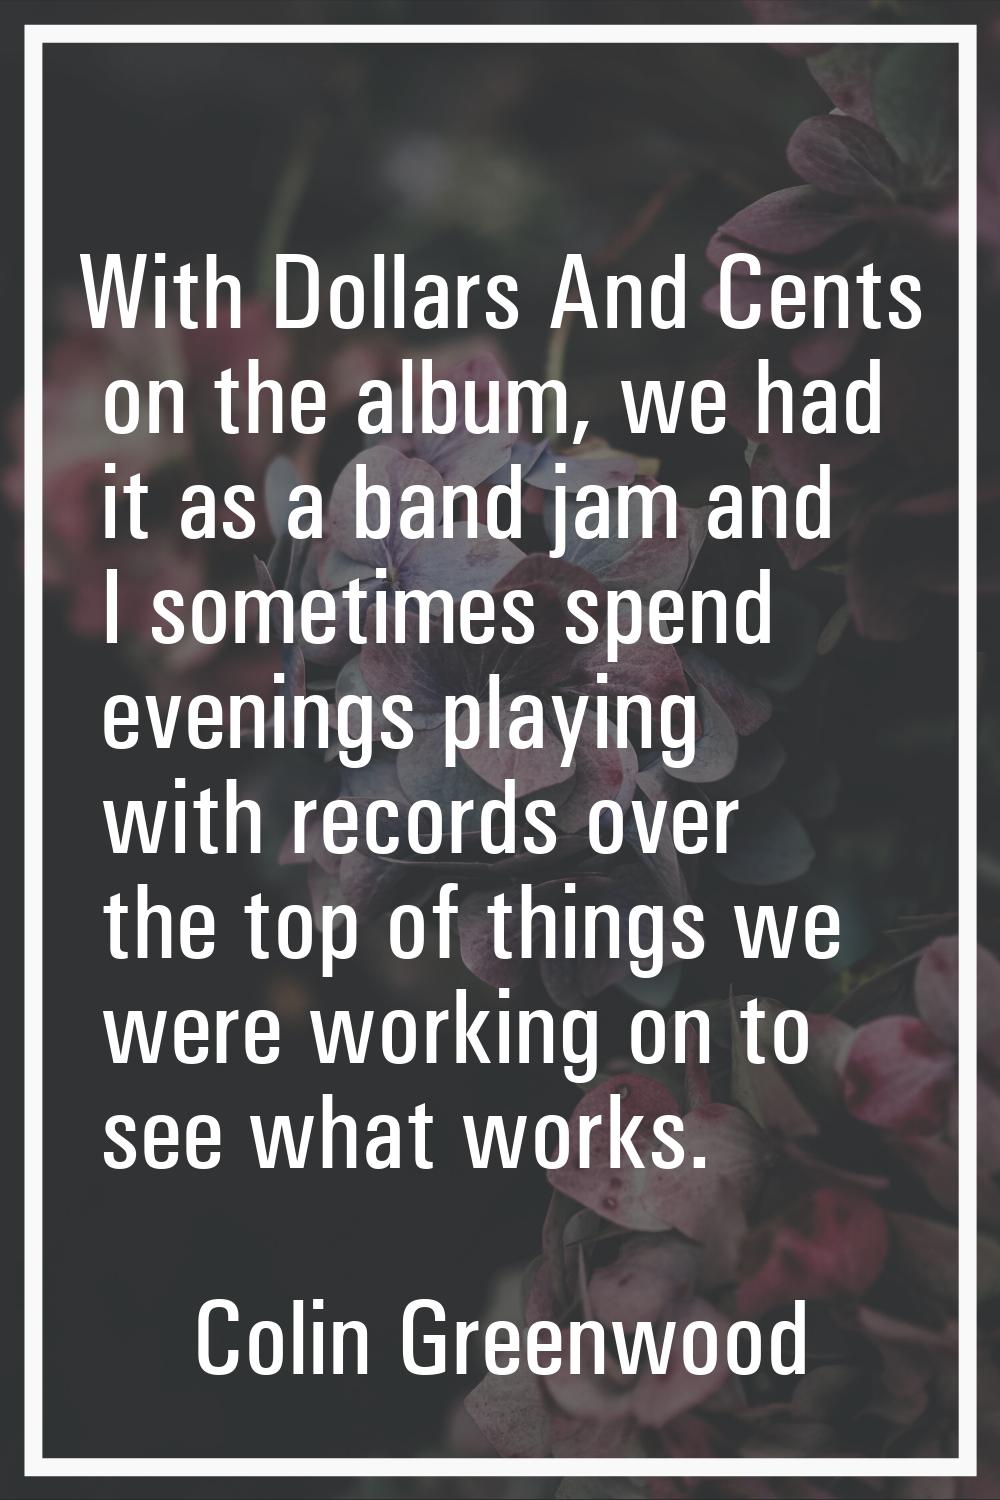 With Dollars And Cents on the album, we had it as a band jam and I sometimes spend evenings playing